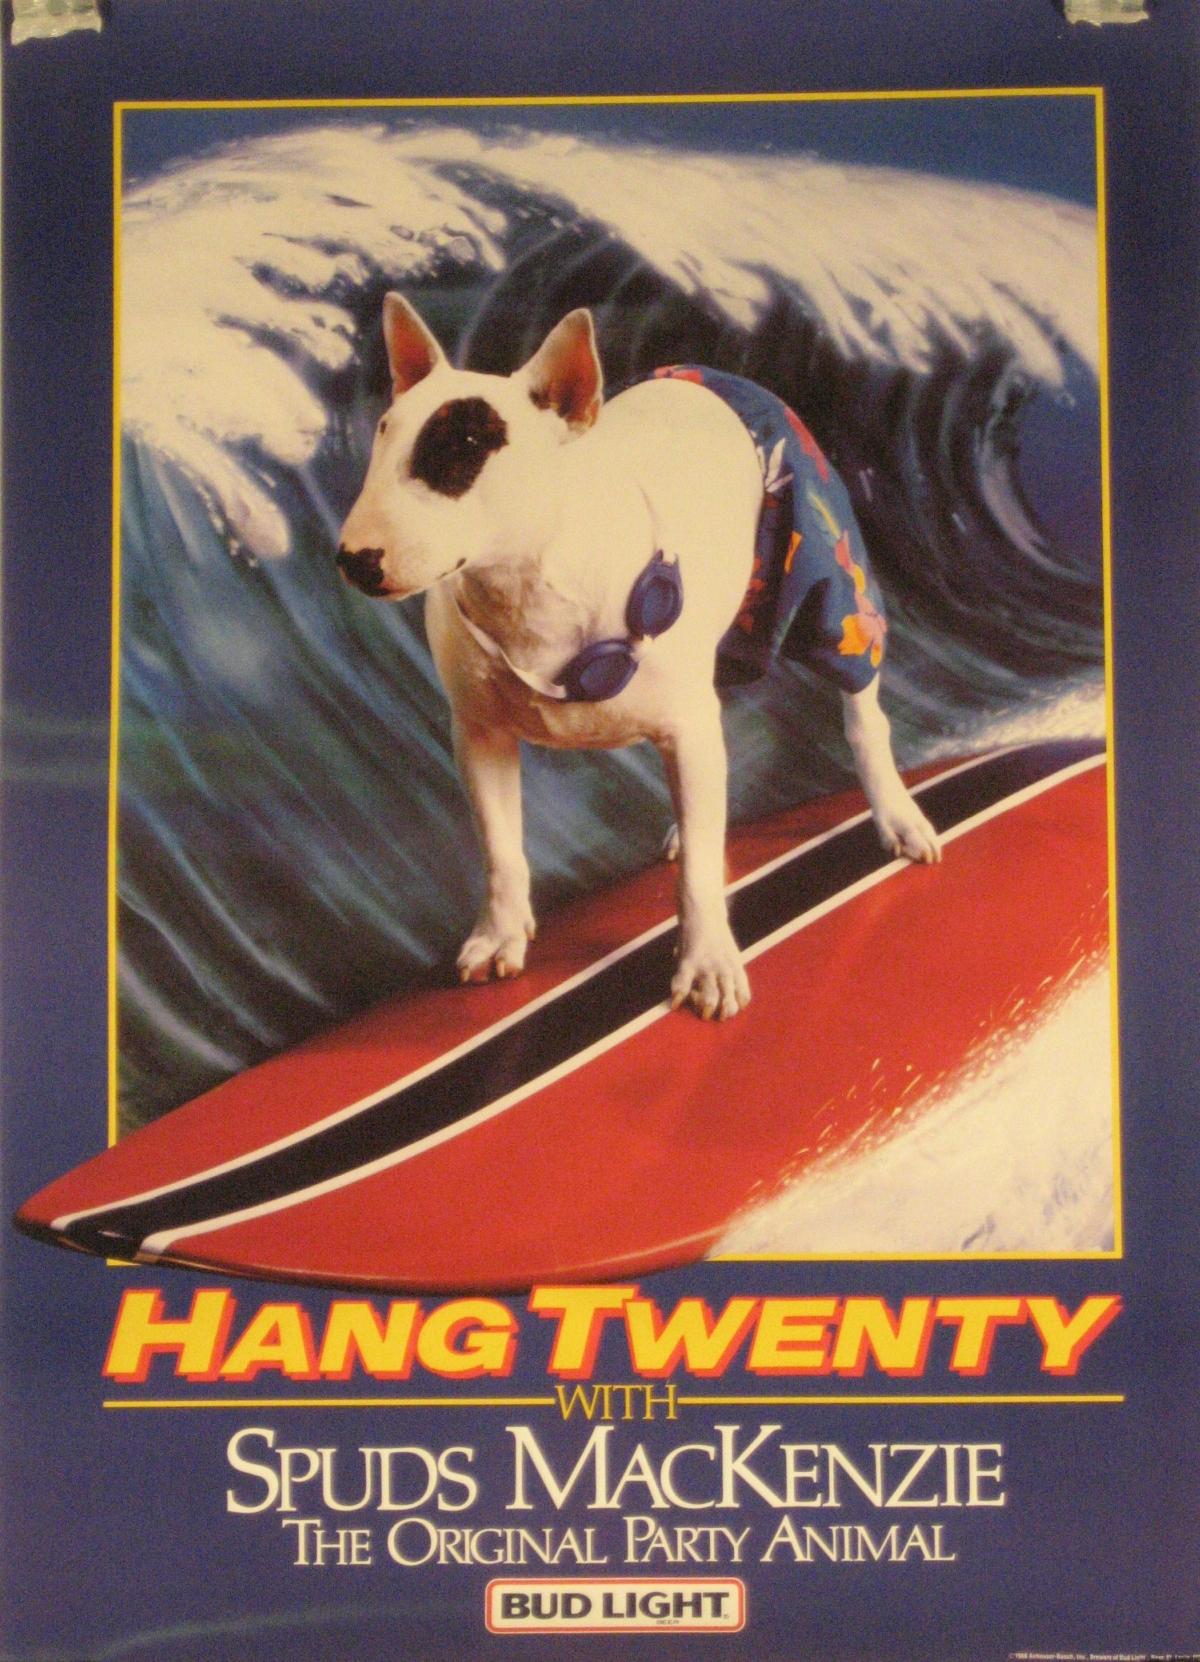 Artist: DDB Needham Agency

Date of Origin: 1986

Medium: Original Offset Lithograph Vintage Poster

Size: 20″ x 28”

 

Original, American advertising poster for the iconic 80s mascot Spuds MacKenzie.  Anheuser-Busch’s Bud Light and Omnicom Group’s